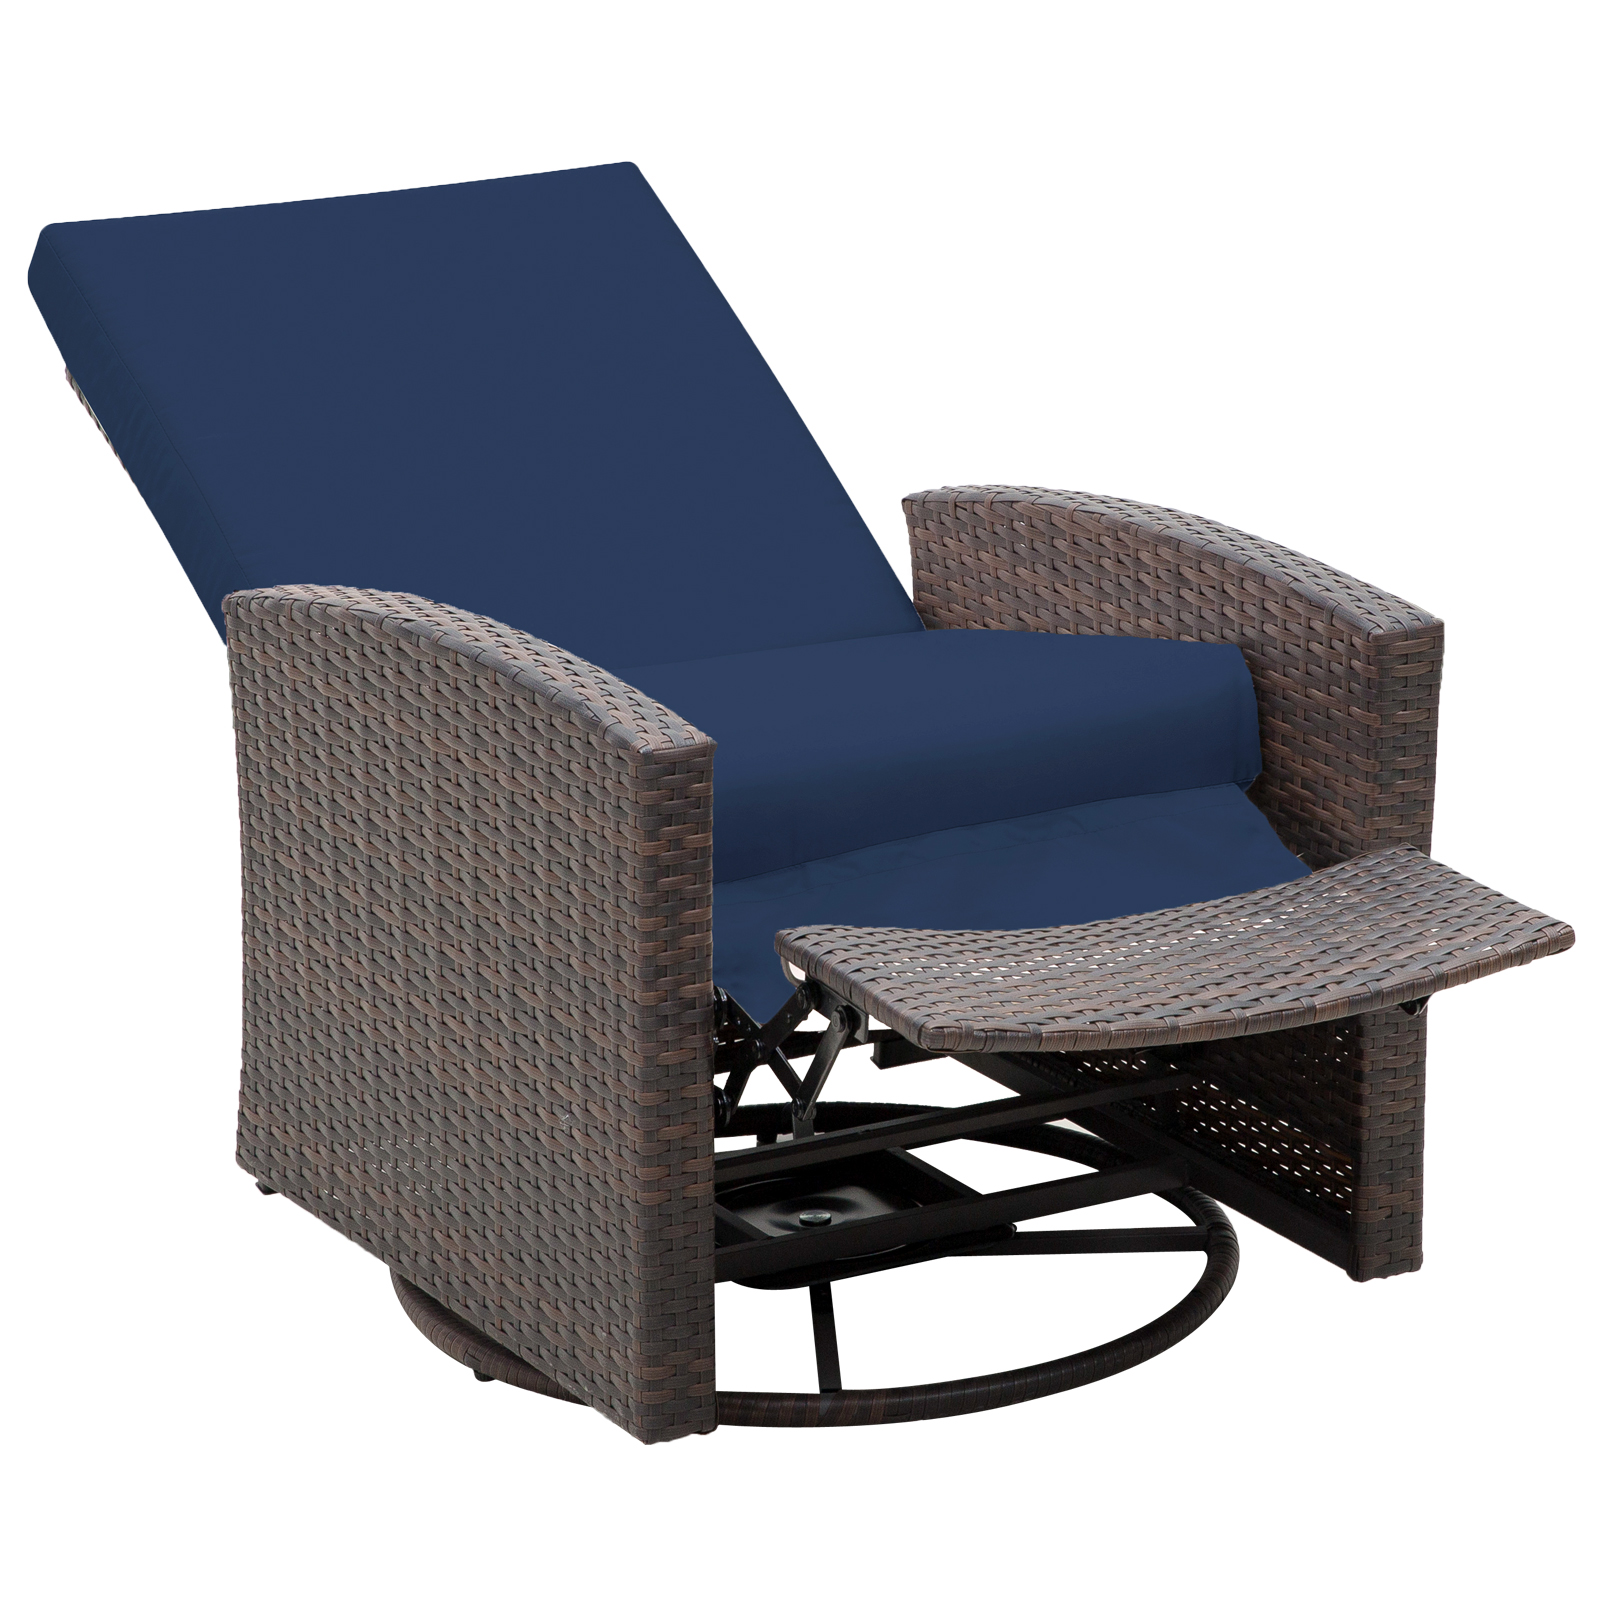 Outsunny Outdoor Wicker Swivel Recliner Chair, Reclining Backrest, Lifting Footrest, 360 Rotating Basic, Water Resistant Cushions for Patio, Dark Blue - image 2 of 2